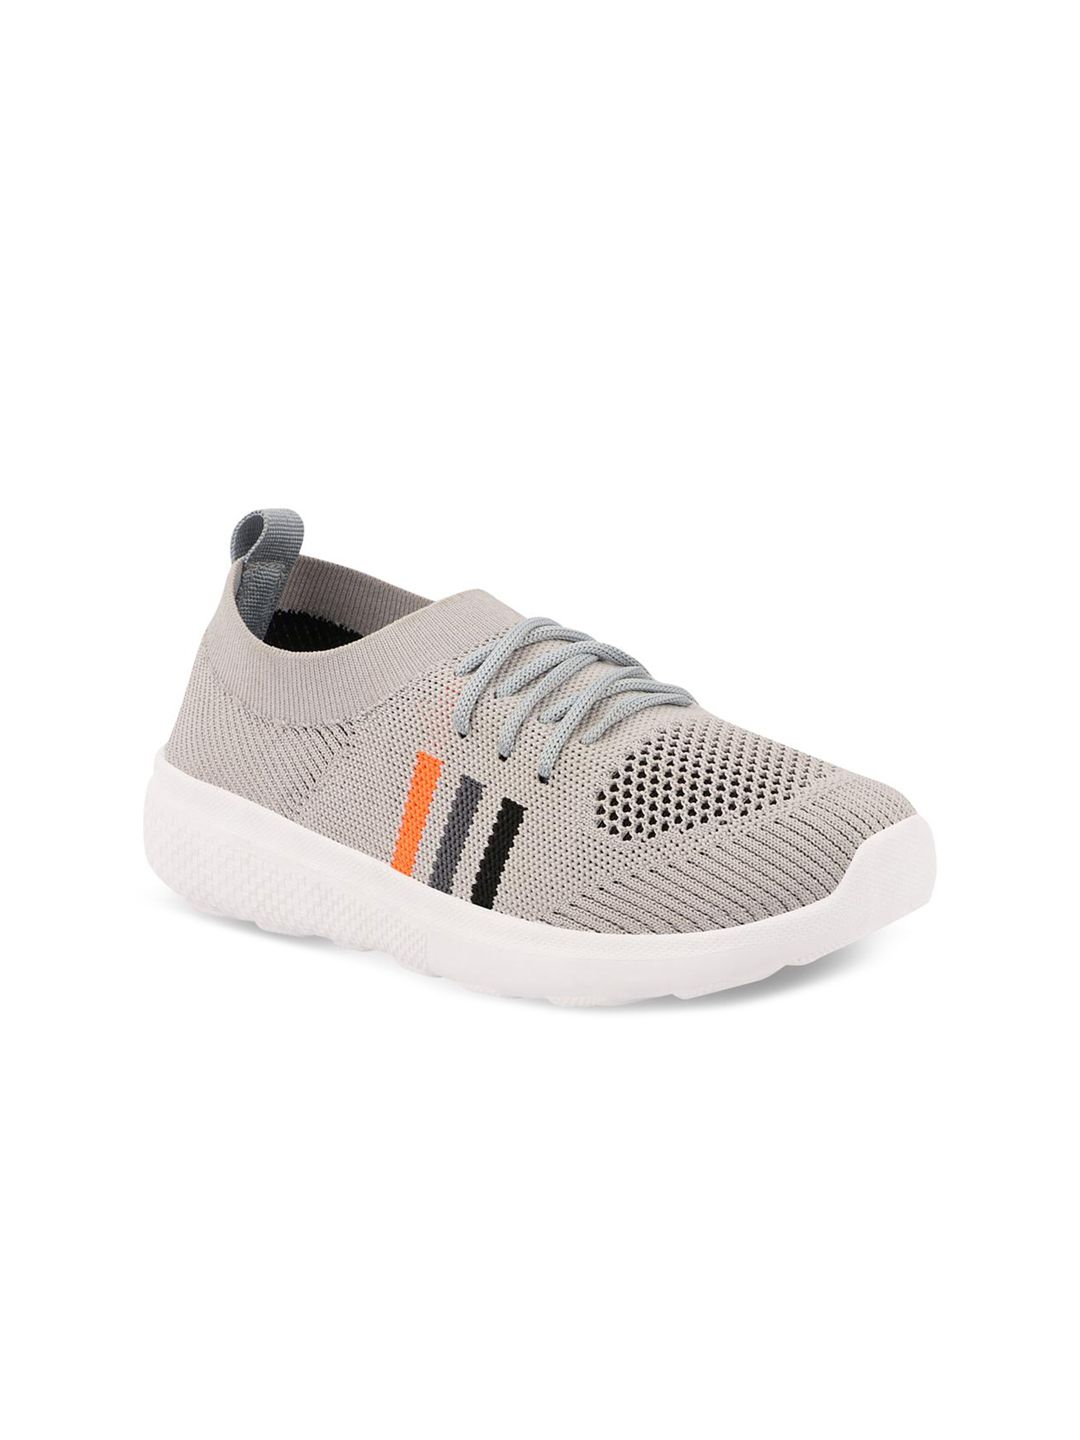 OPHELIA Women Woven Design Lightweight Sneakers Price in India